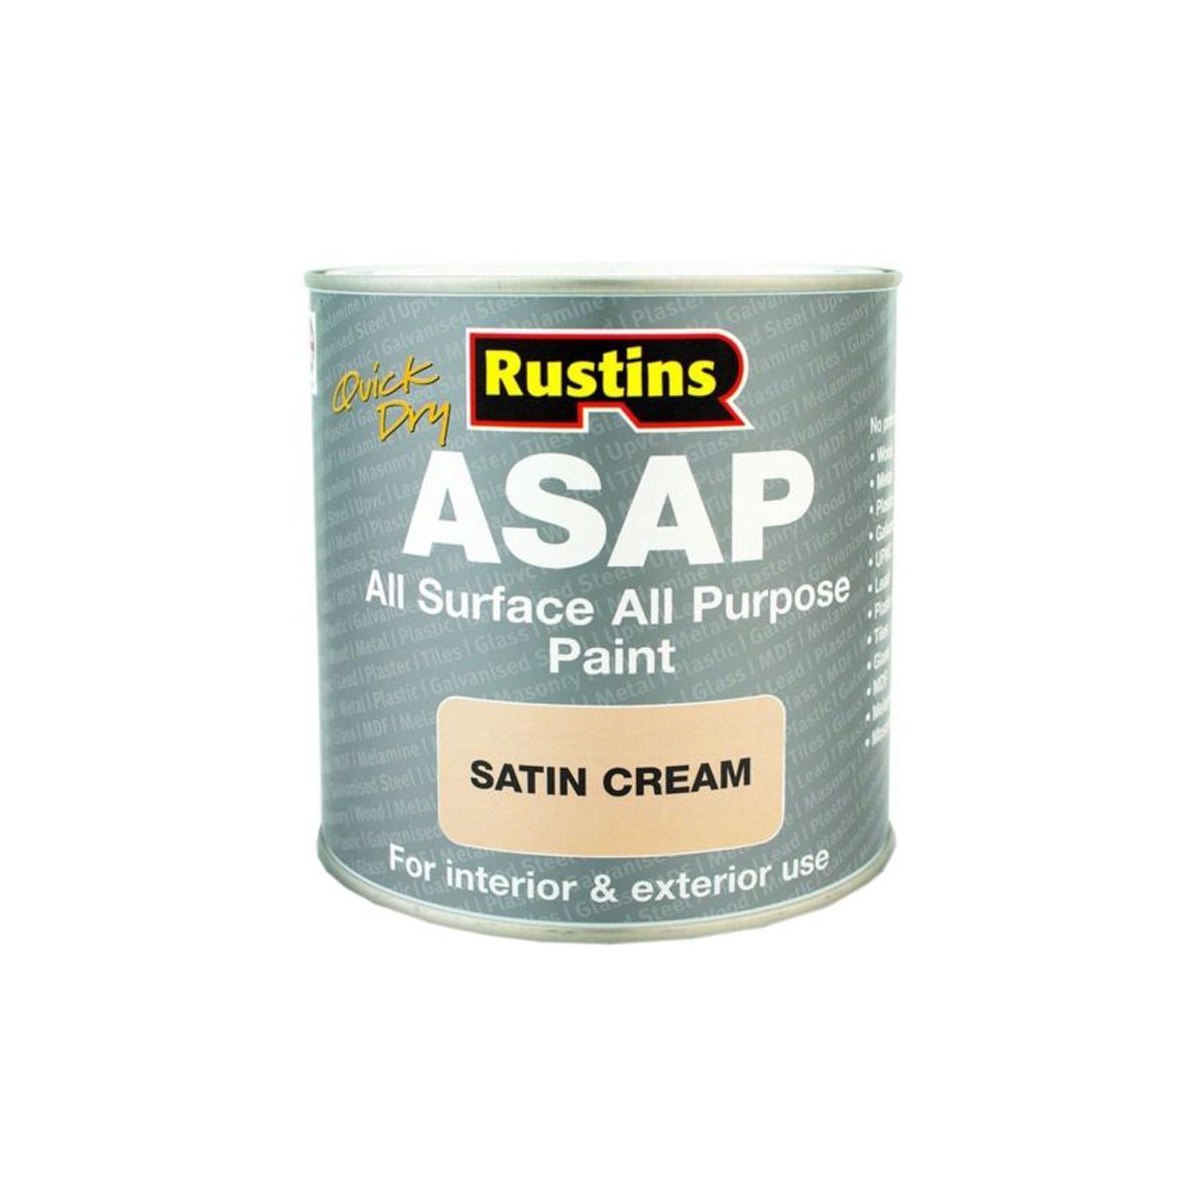 Rustins Quick Dry All Surface All Purpose Paint (ASAP) Cream 250ml